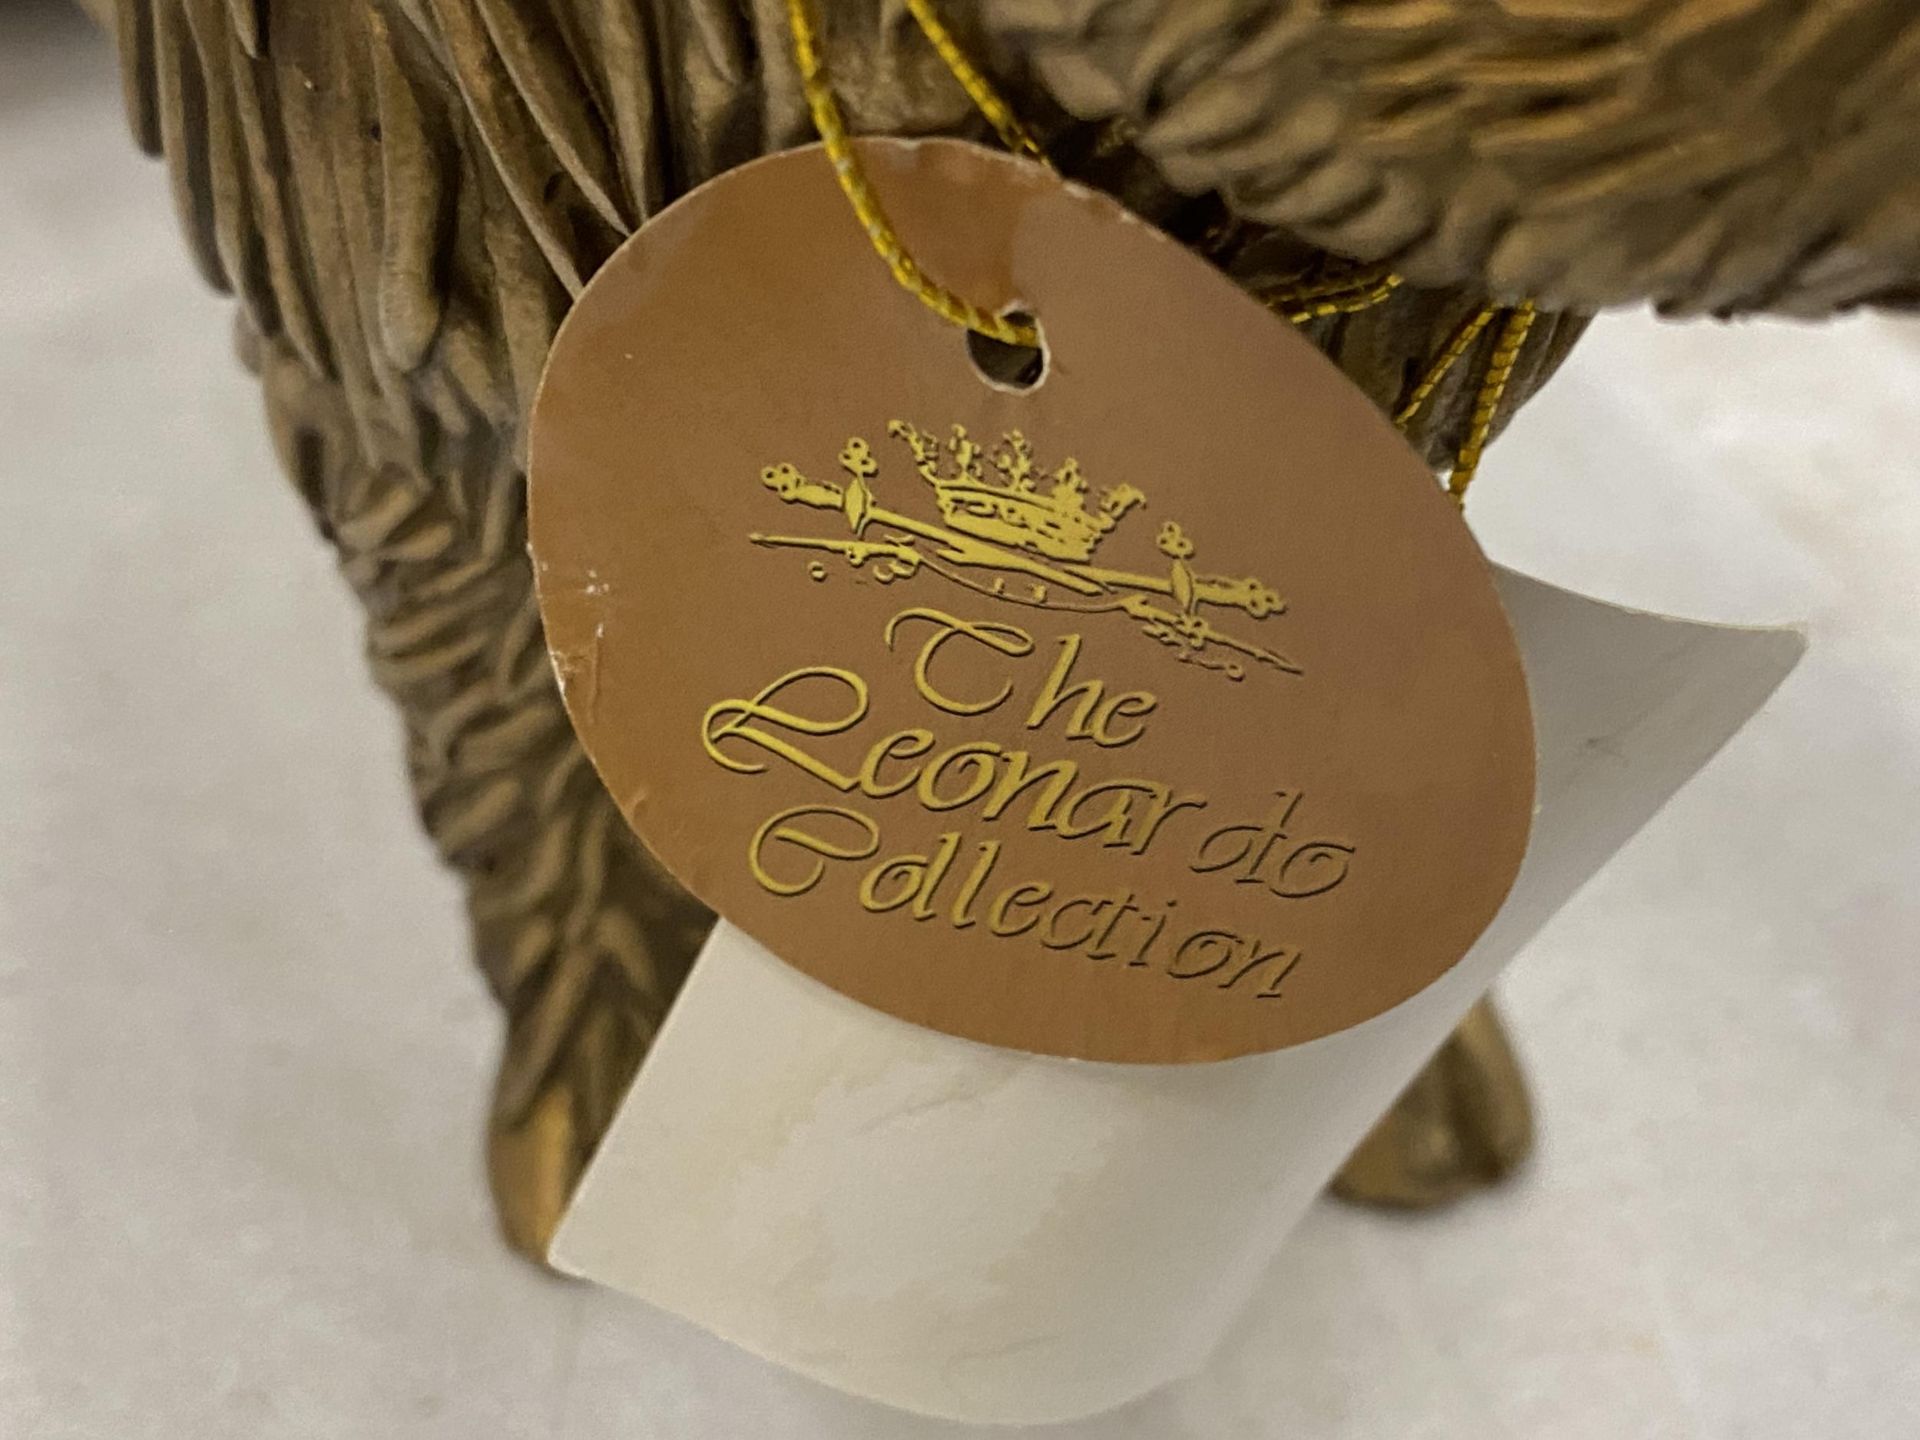 A GOLD COLOURED MODEL OF A HIGHLAND COW BY LEONARDO REFLECTIONS PLUS A BOXED ATLAS EDITIONS - Image 5 of 5